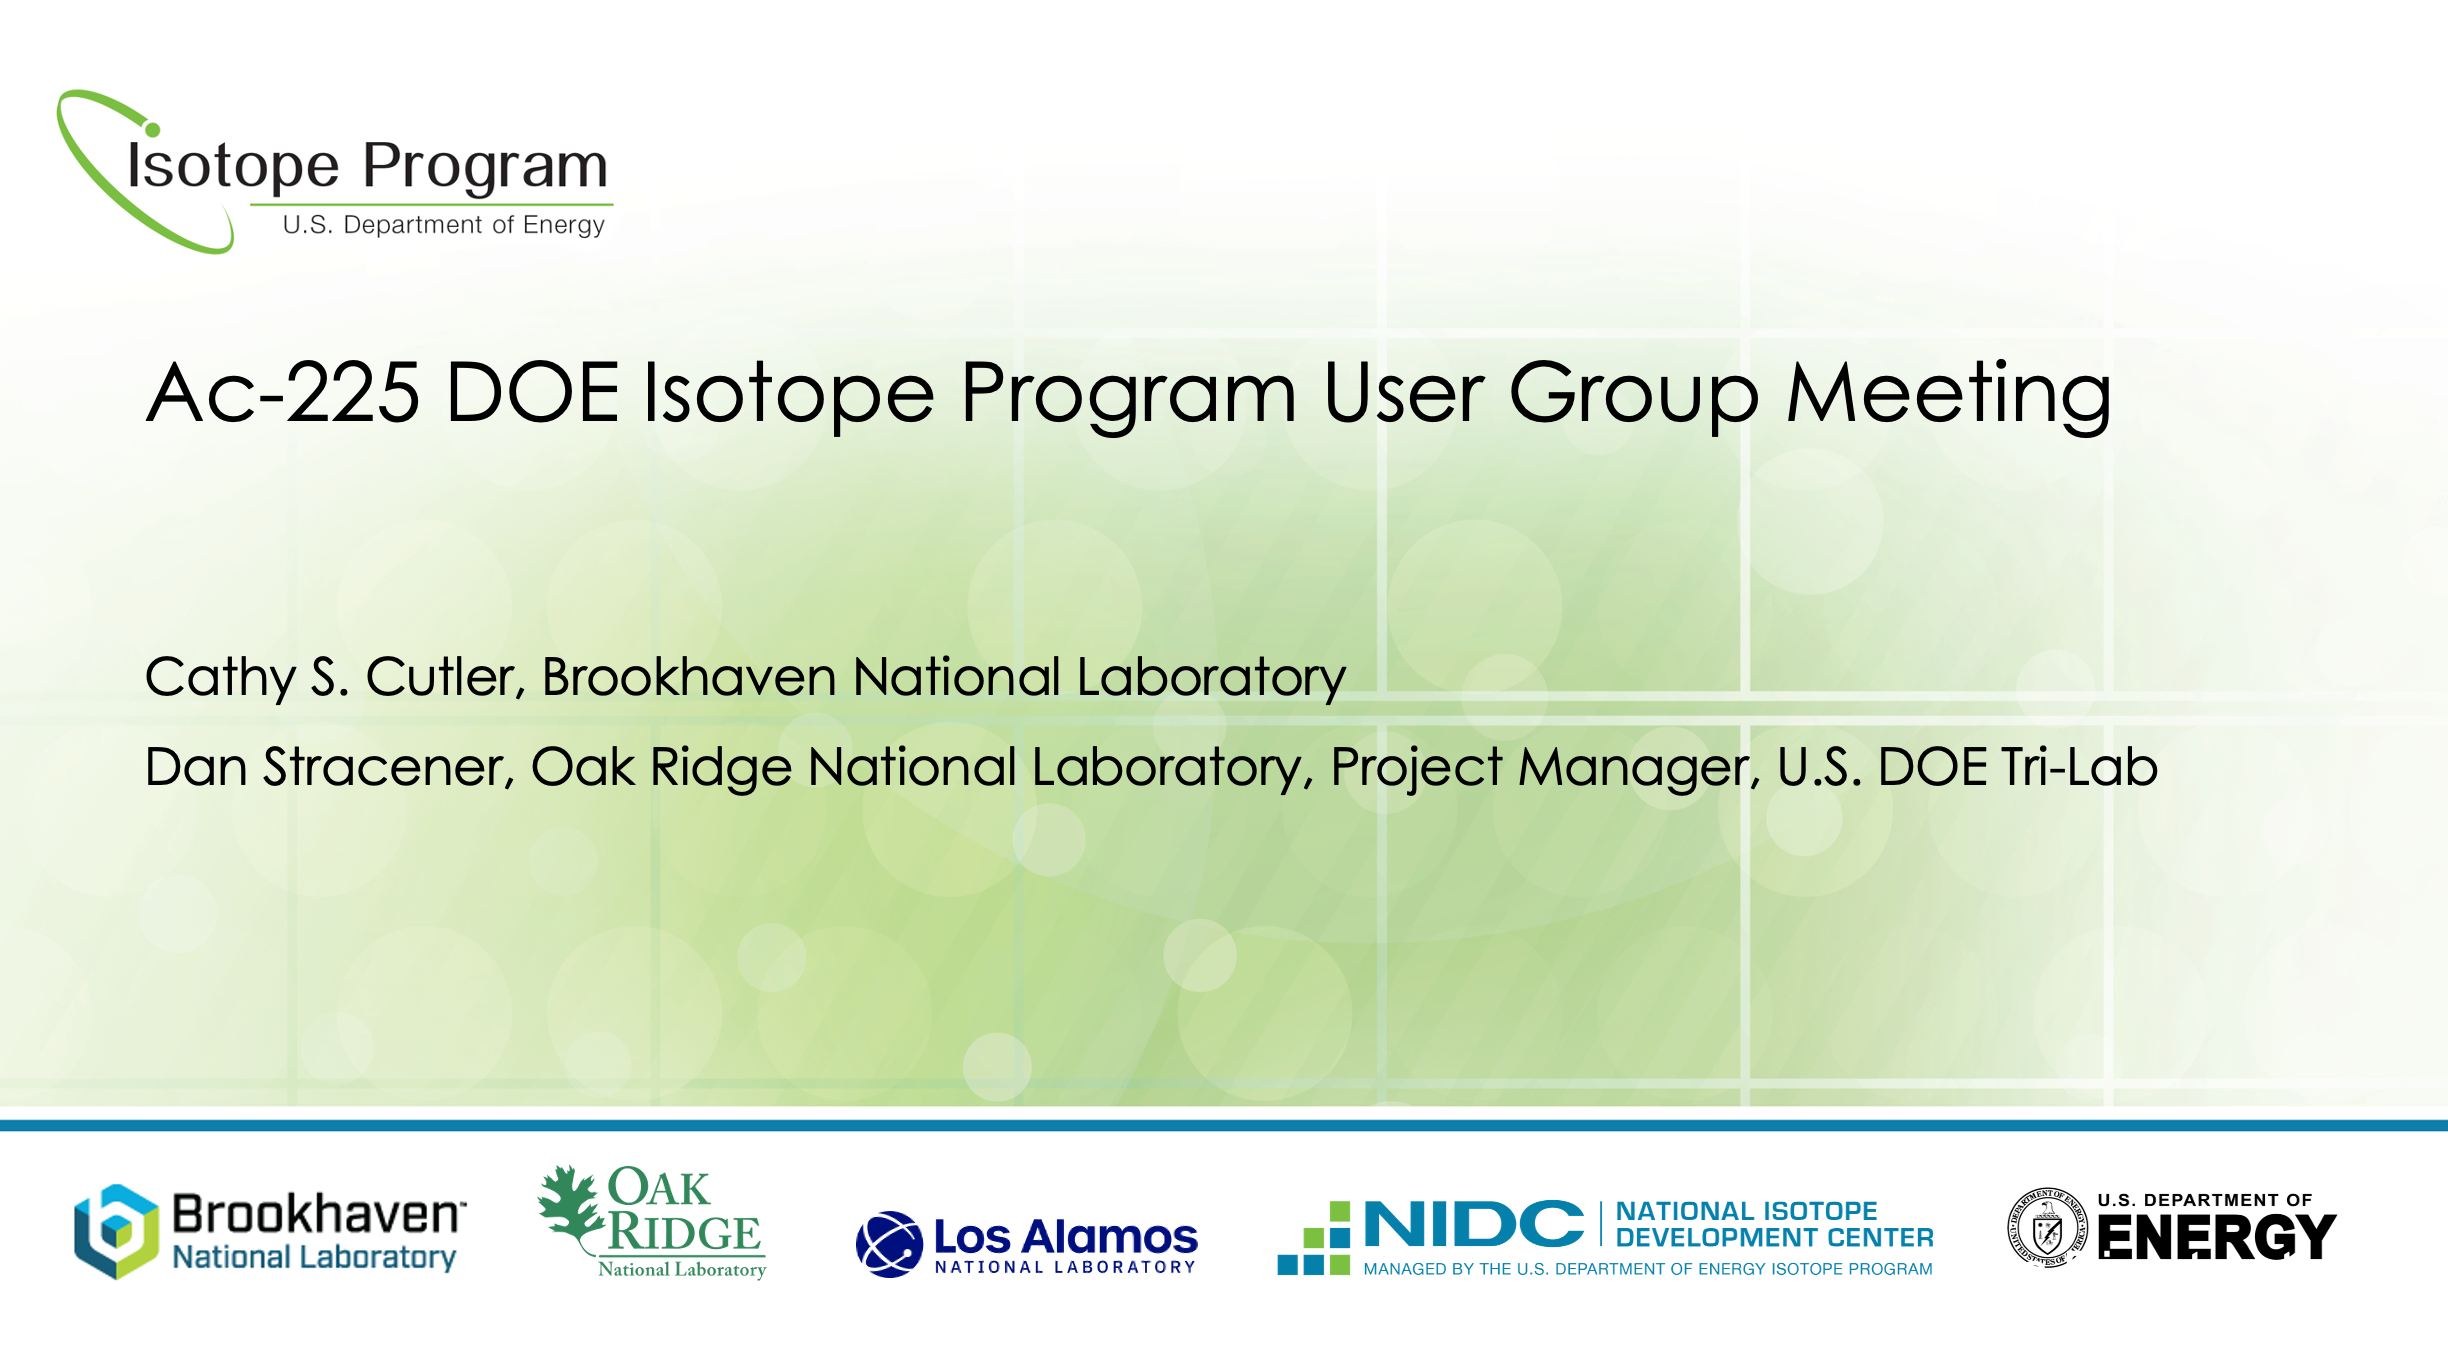 Ac-225 DOE Isotope Program User Group Meeting by Dr. Cathy Cutler, Brookhaven National Laboratory